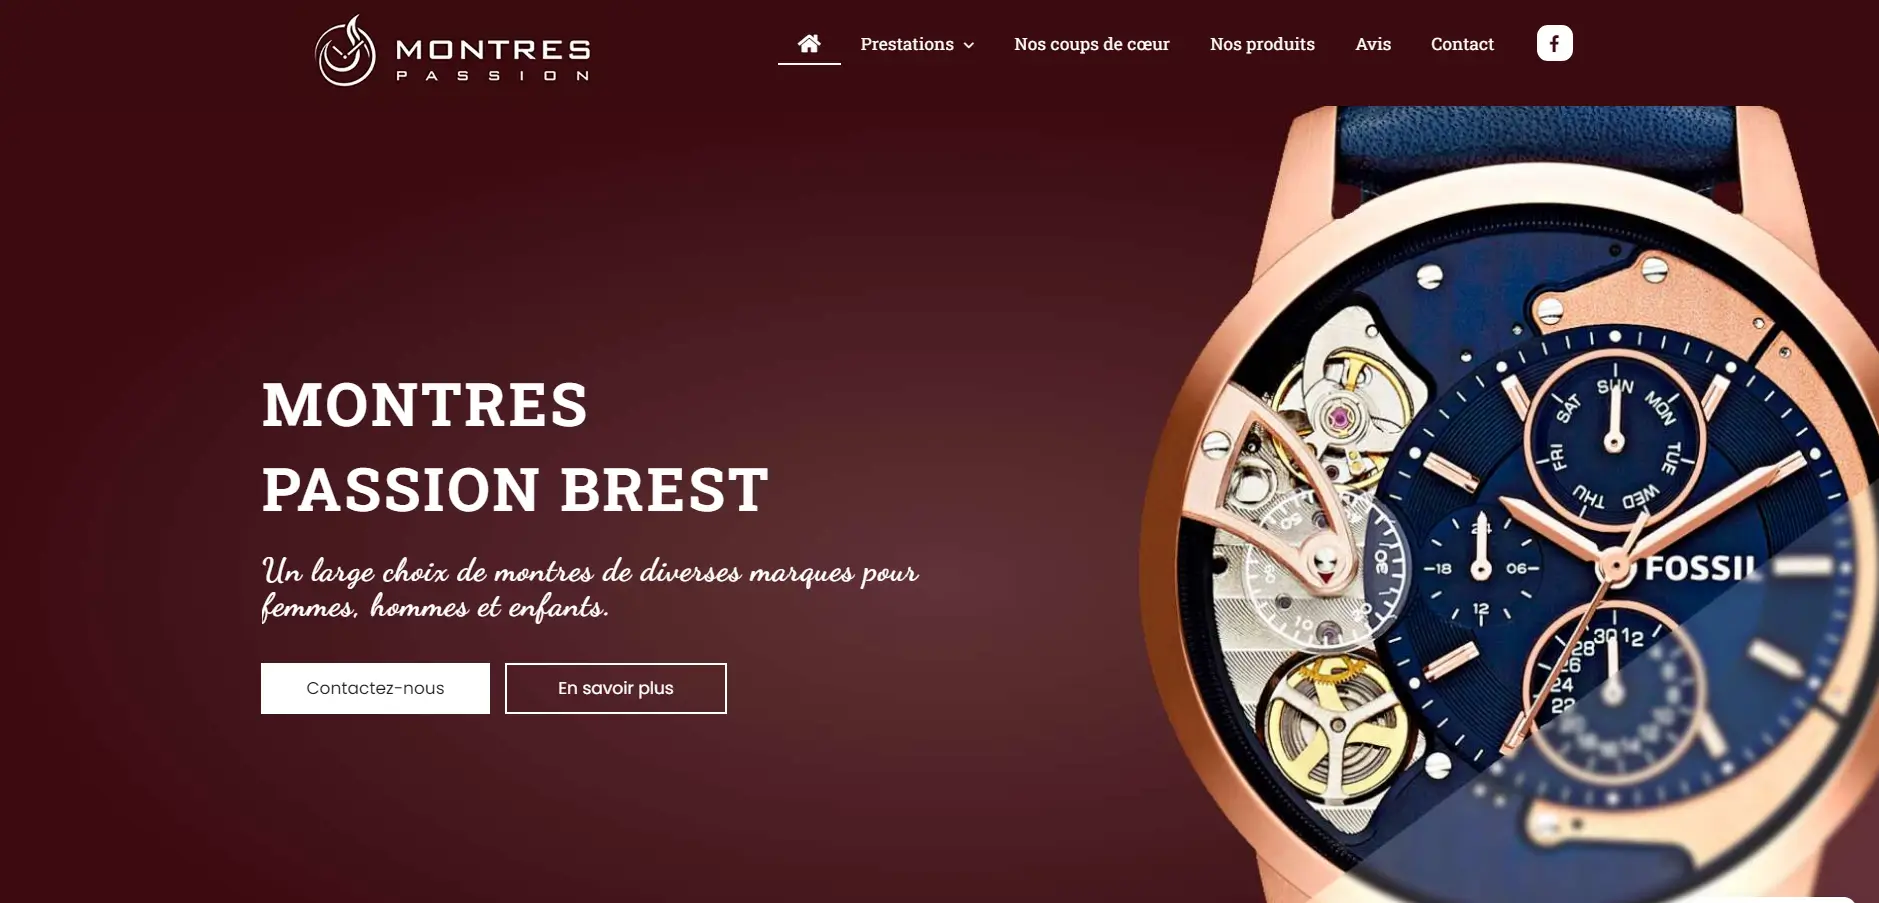 Coherence Agence Digitale Montres Passion Brest